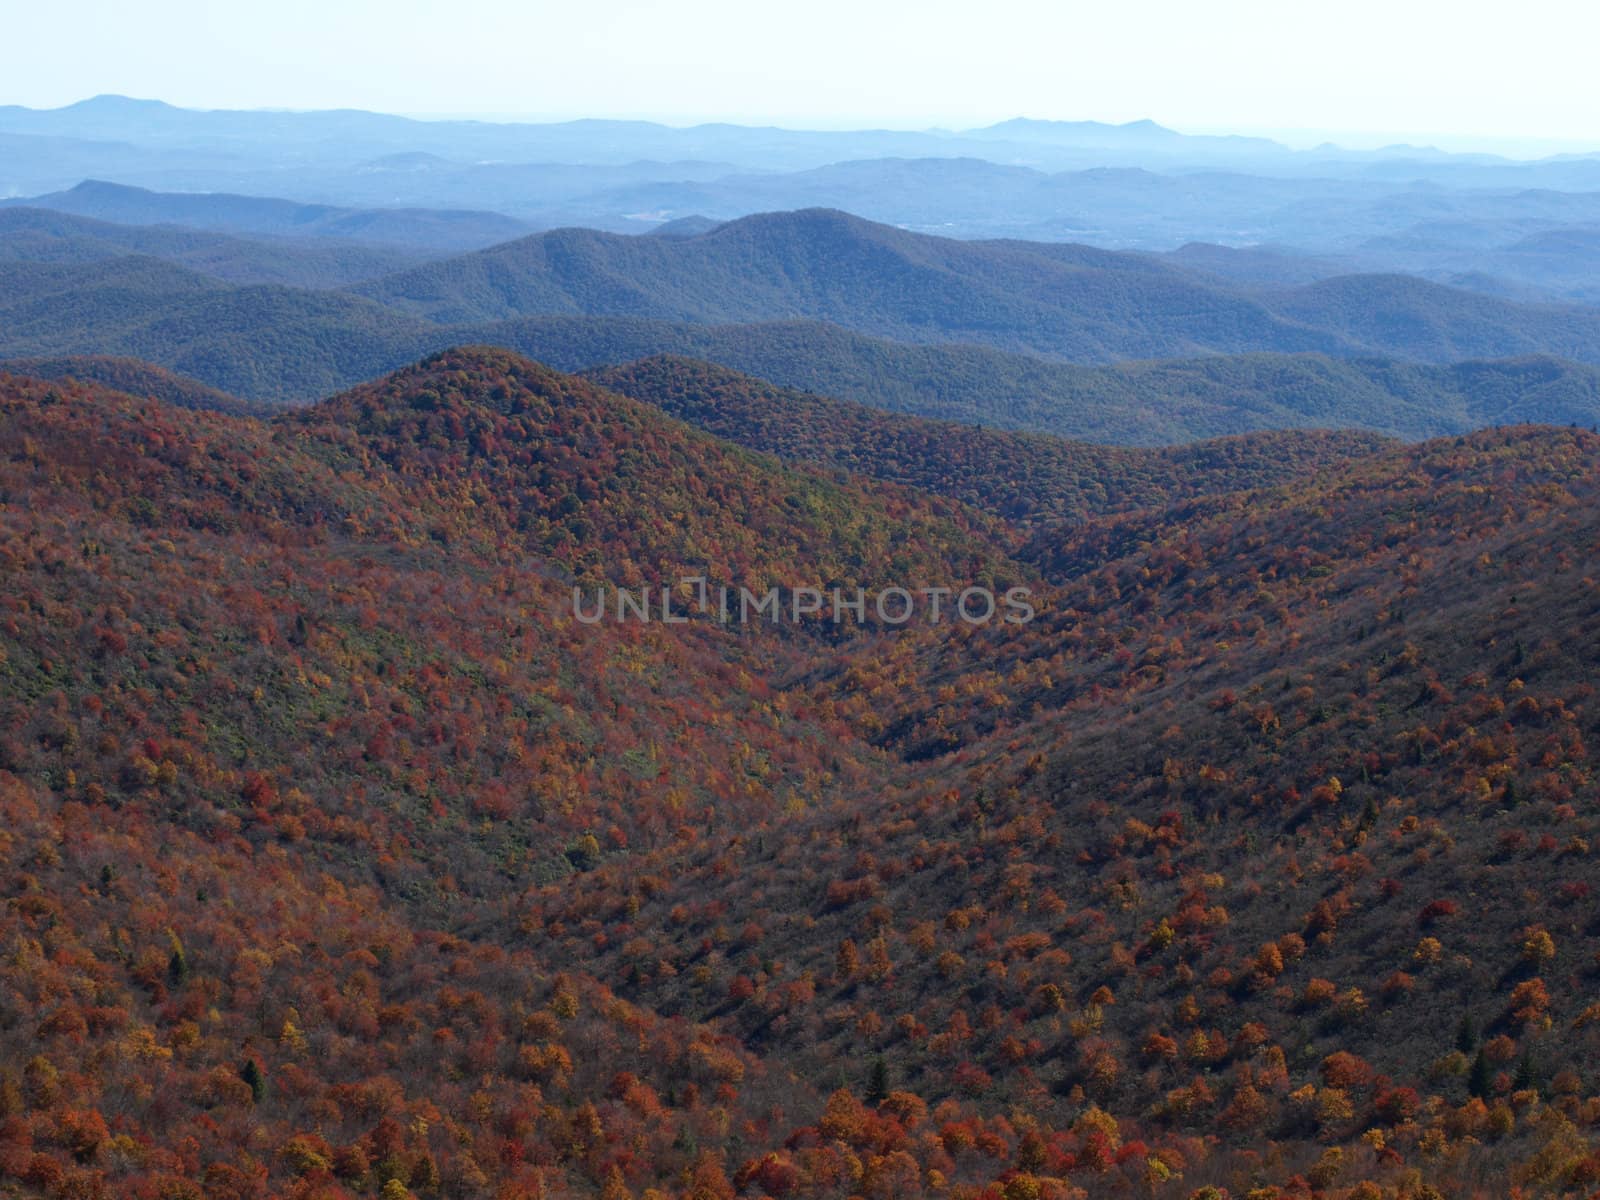 The North Carolina mountains seen during the fall of the year